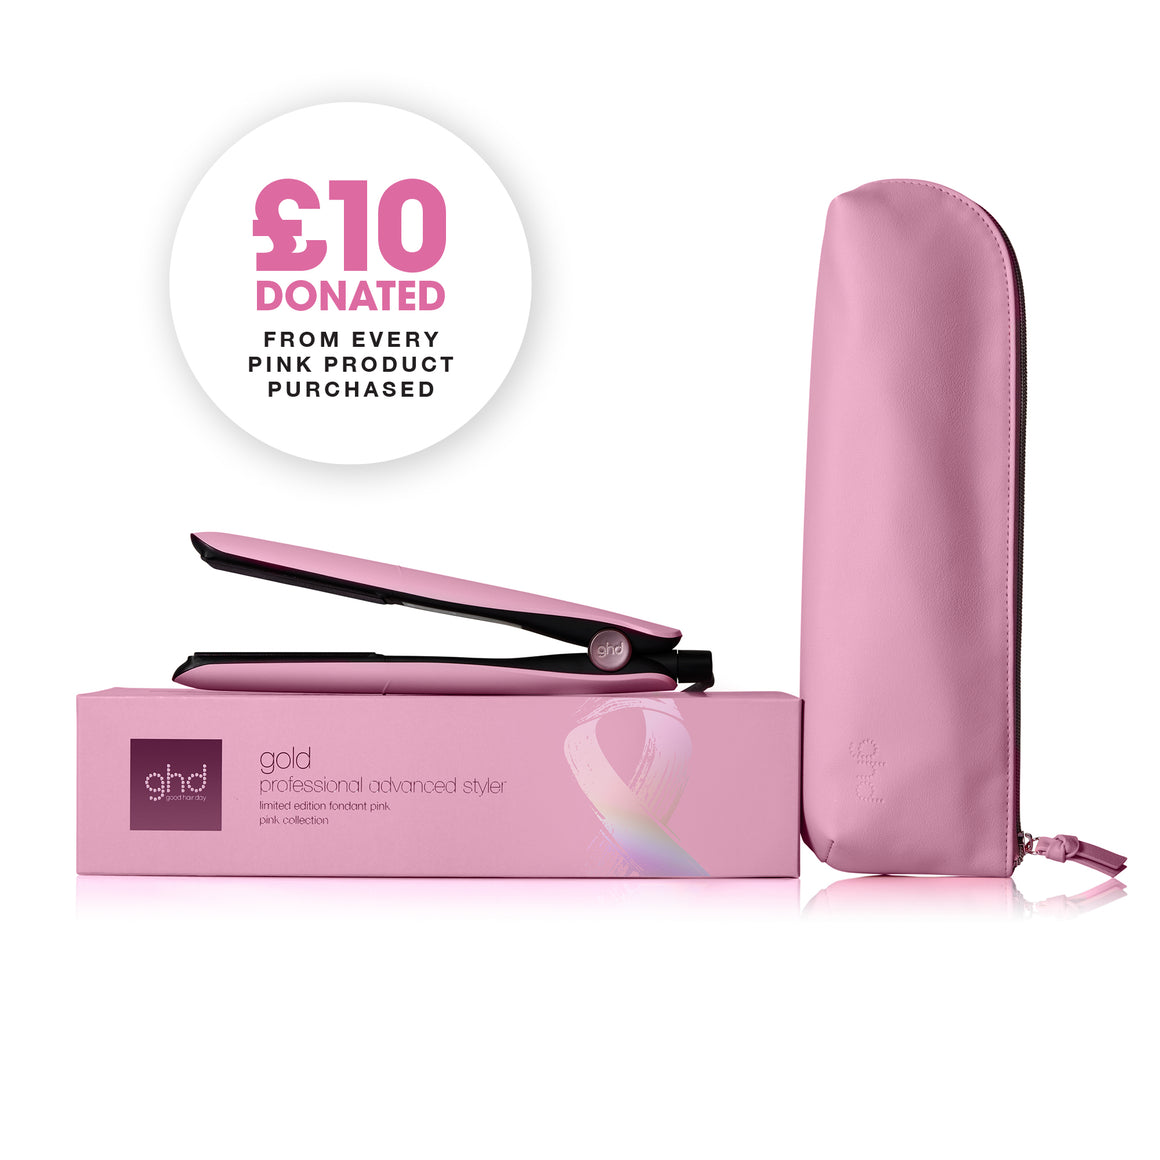 ghd Gold Hair Straightener in Fondant Pink at Eds Hair Bramhall (Manchester)